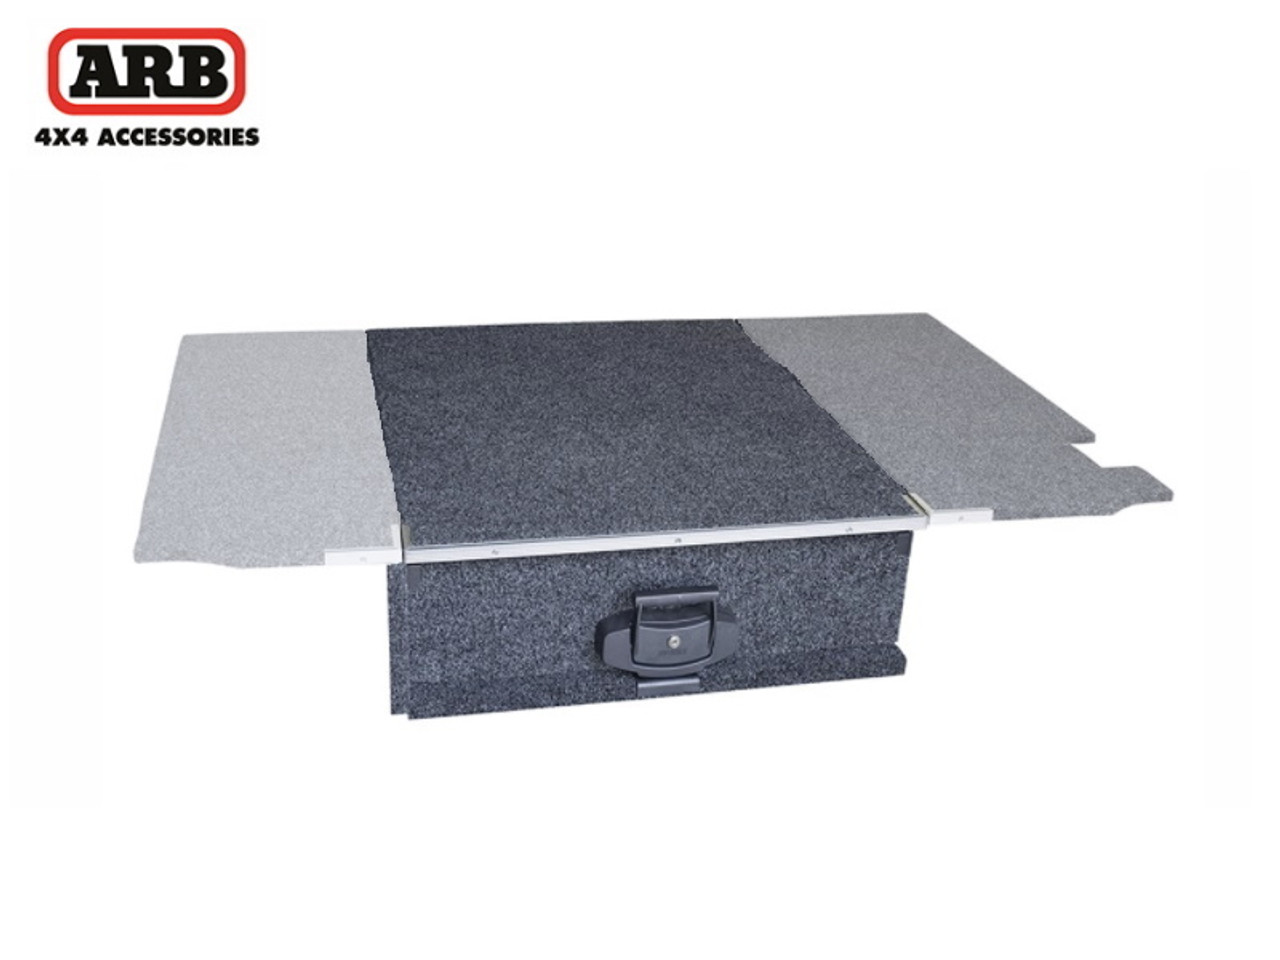 Defender ARB Outback Solutions Single Drawer With Lock - CRDDEF